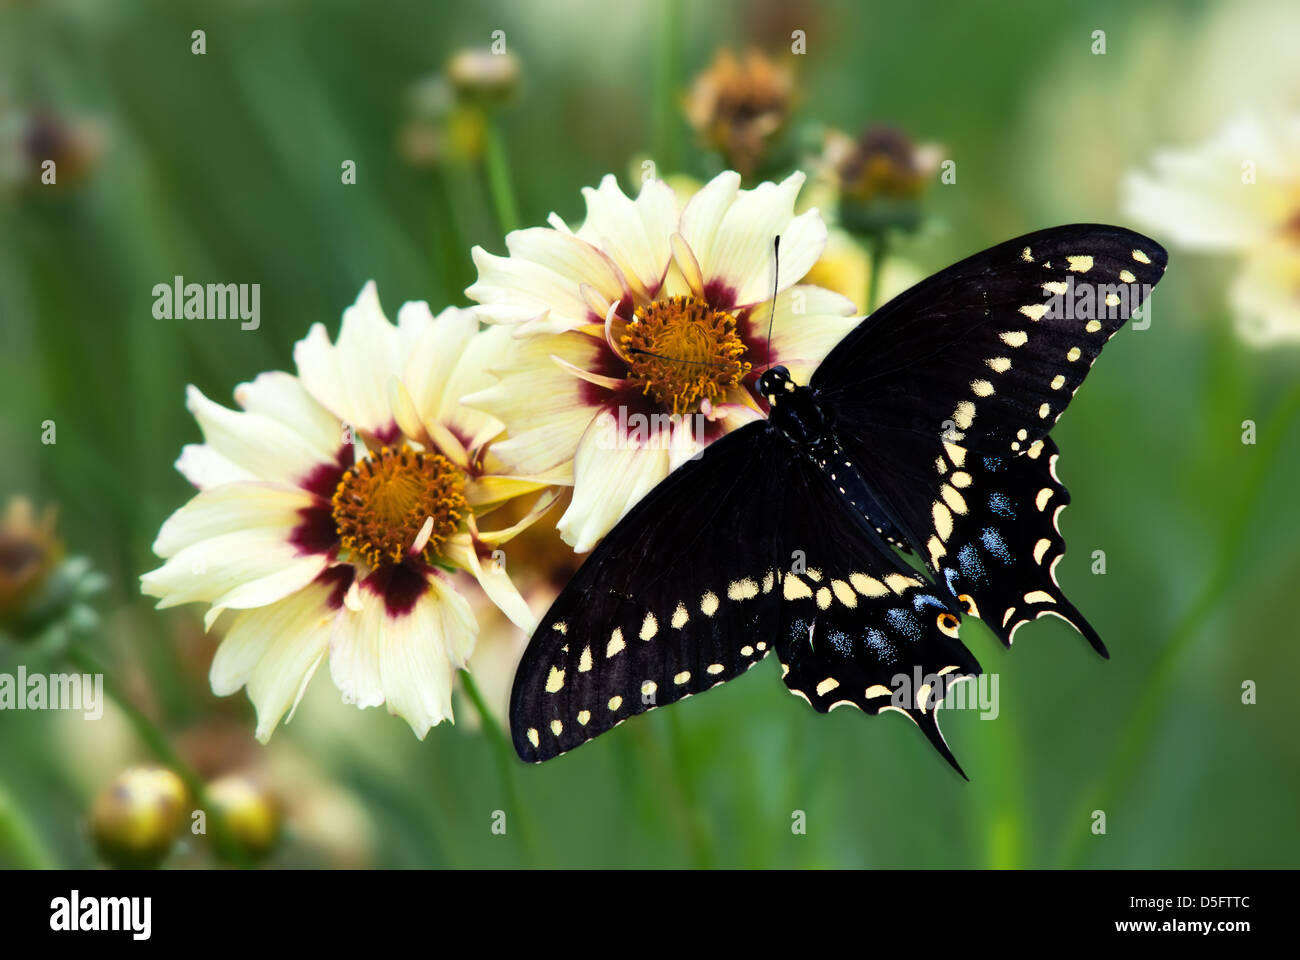 Black Swallowtail butterfly (Papilio polyxenes) on yellow flowers Stock Photo